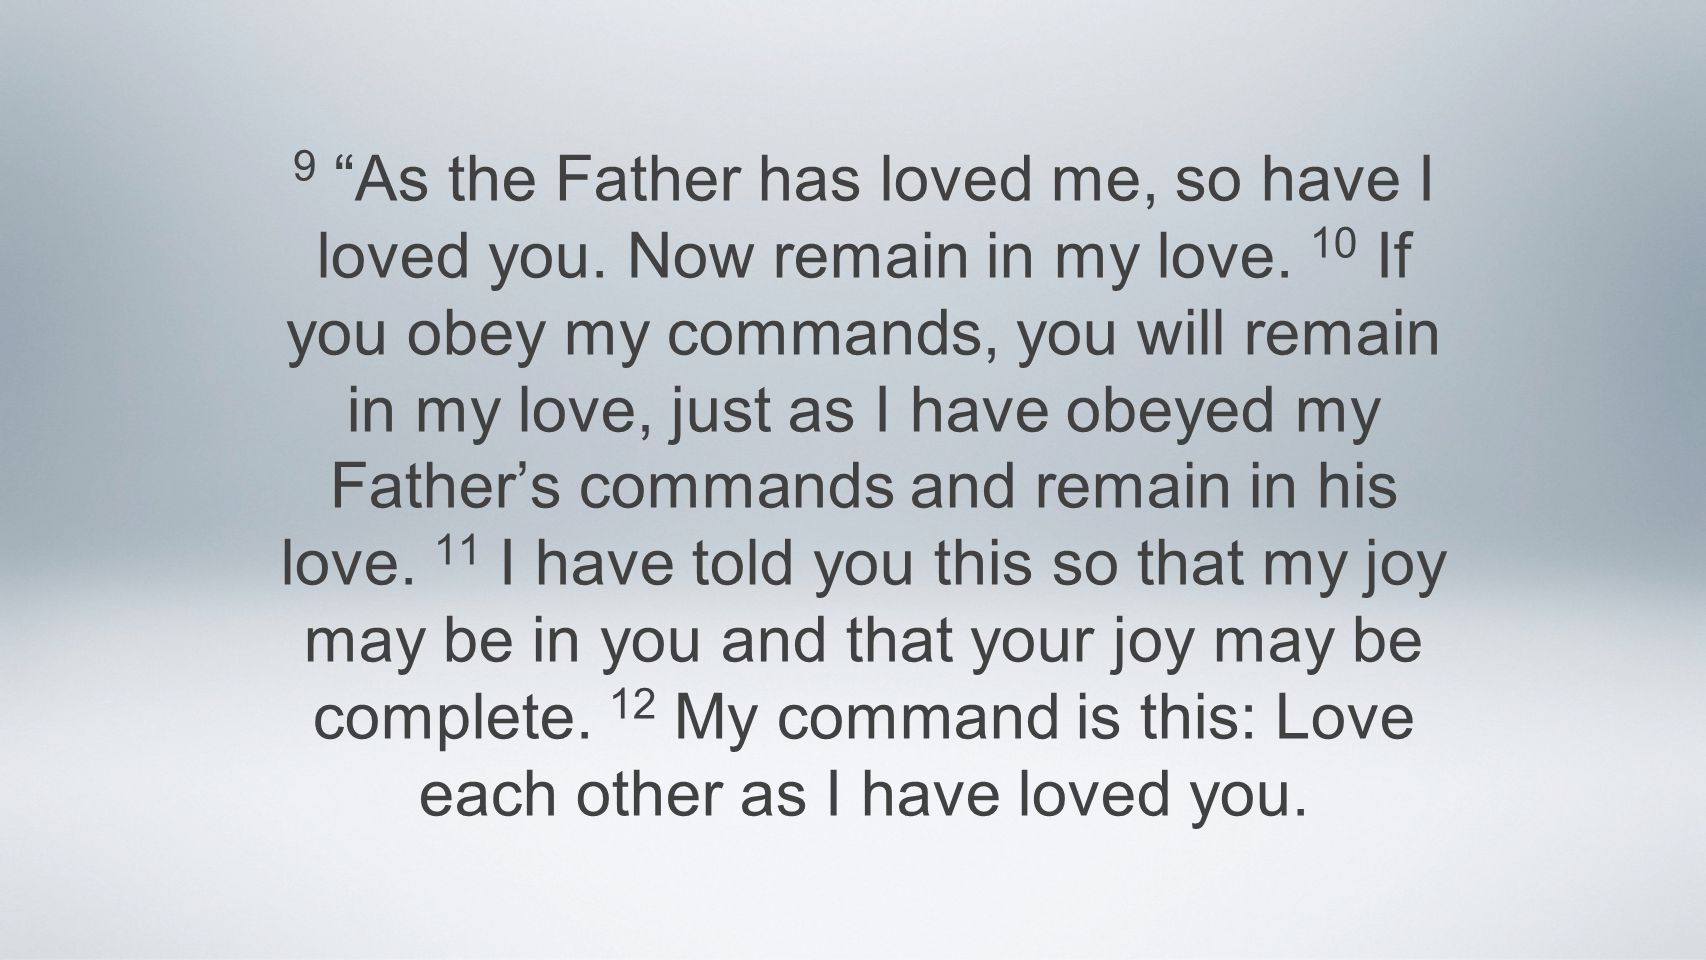 9 As the Father has loved me, so have I loved you.